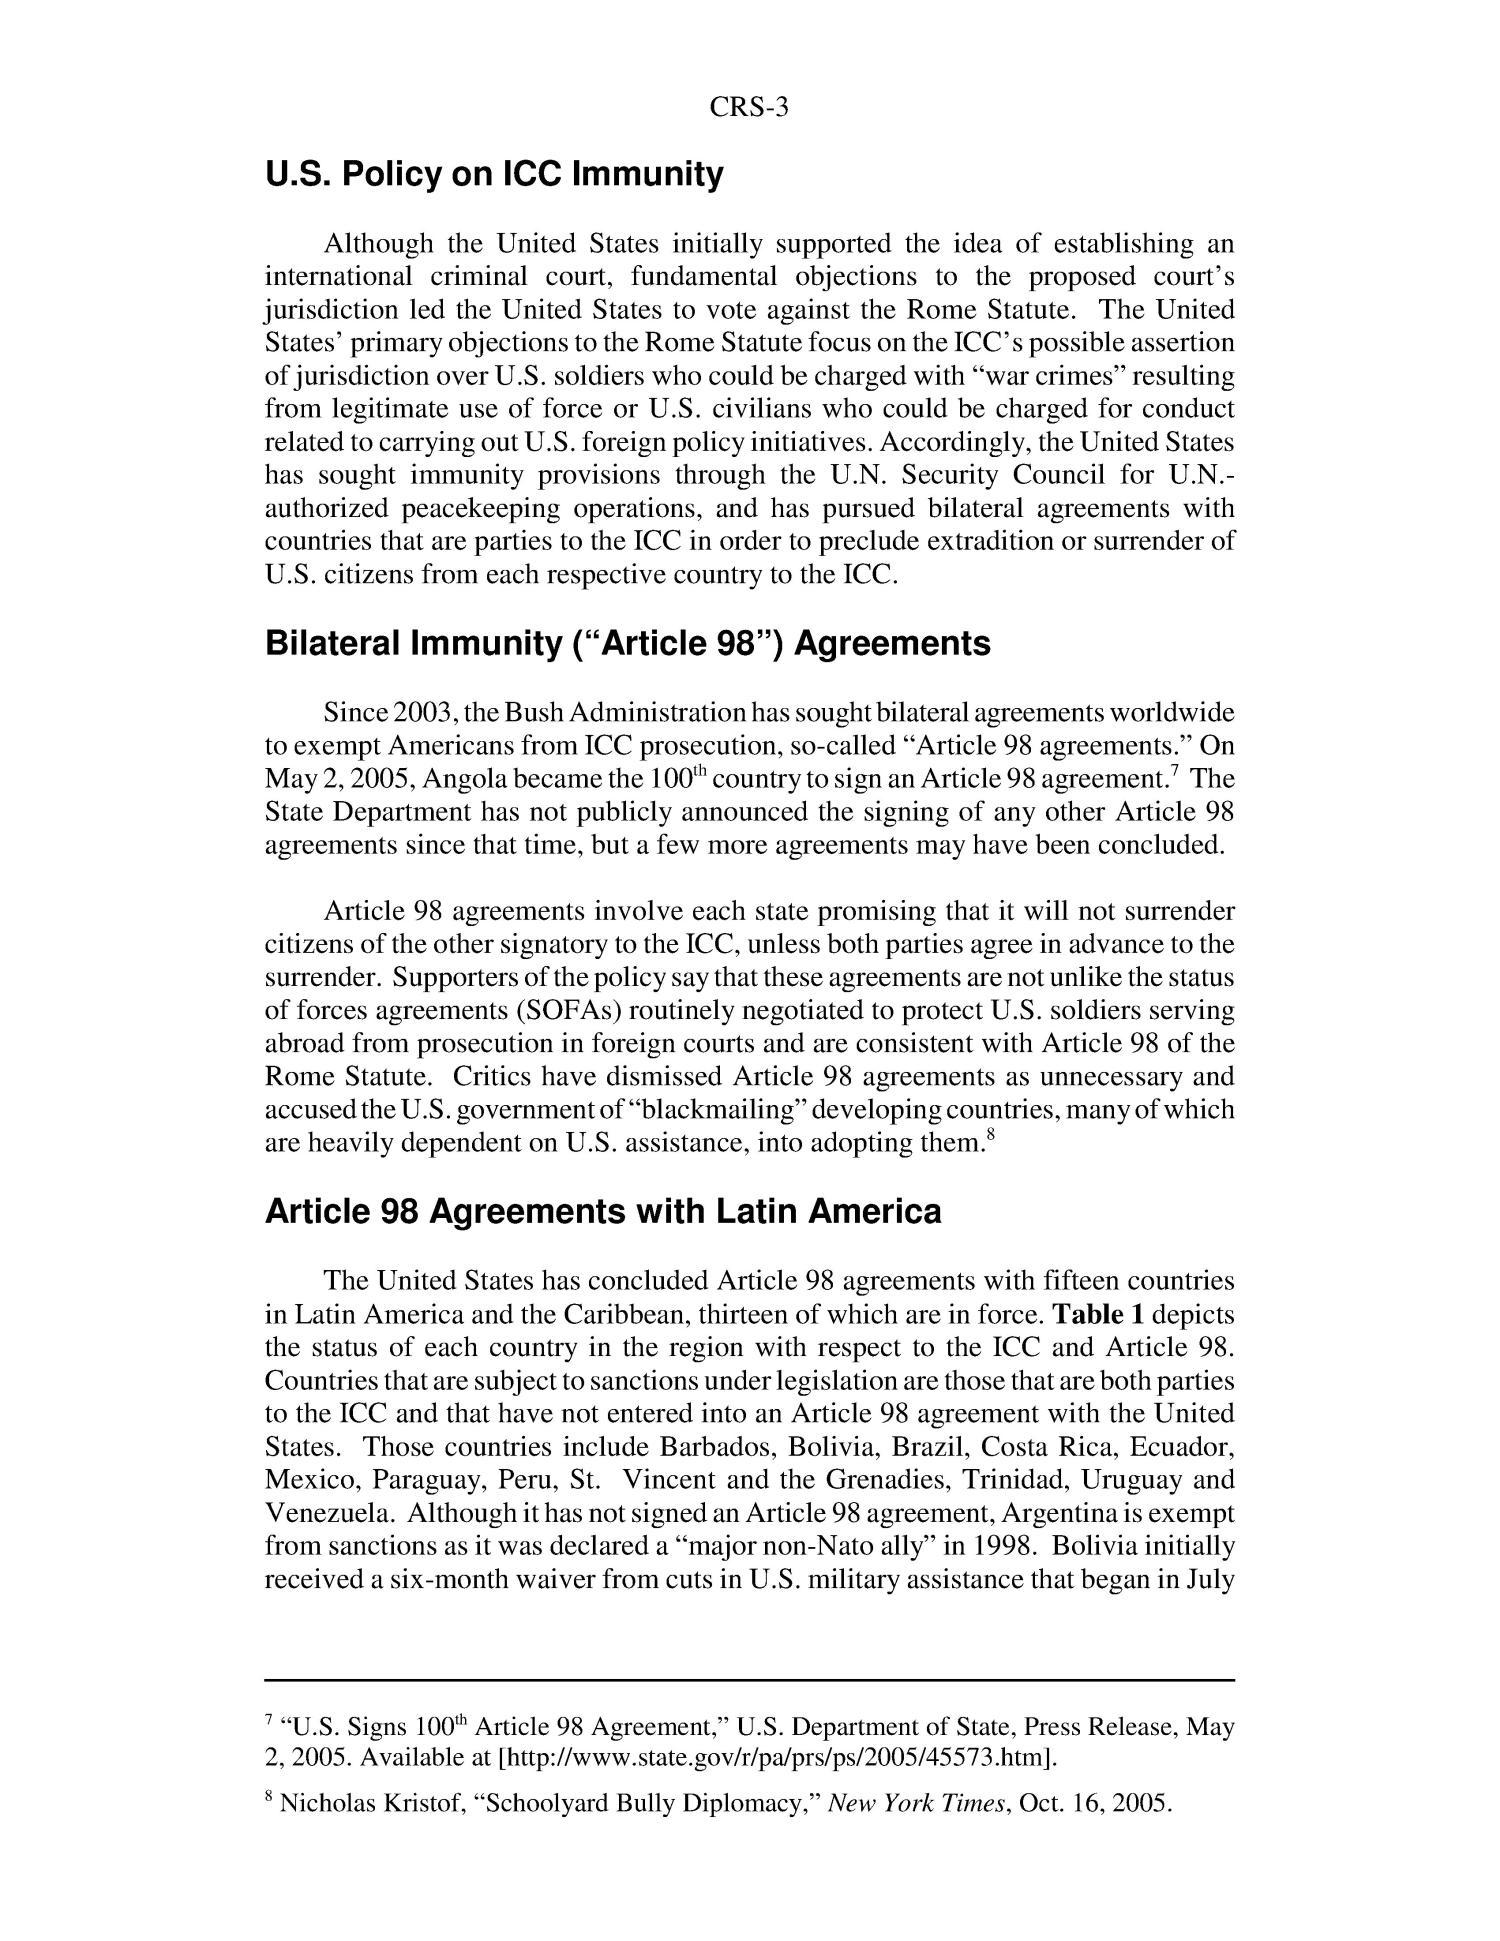 Article 98 Agreements and Sanctions on U.S. Foreign Aid to Latin America
                                                
                                                    [Sequence #]: 6 of 14
                                                